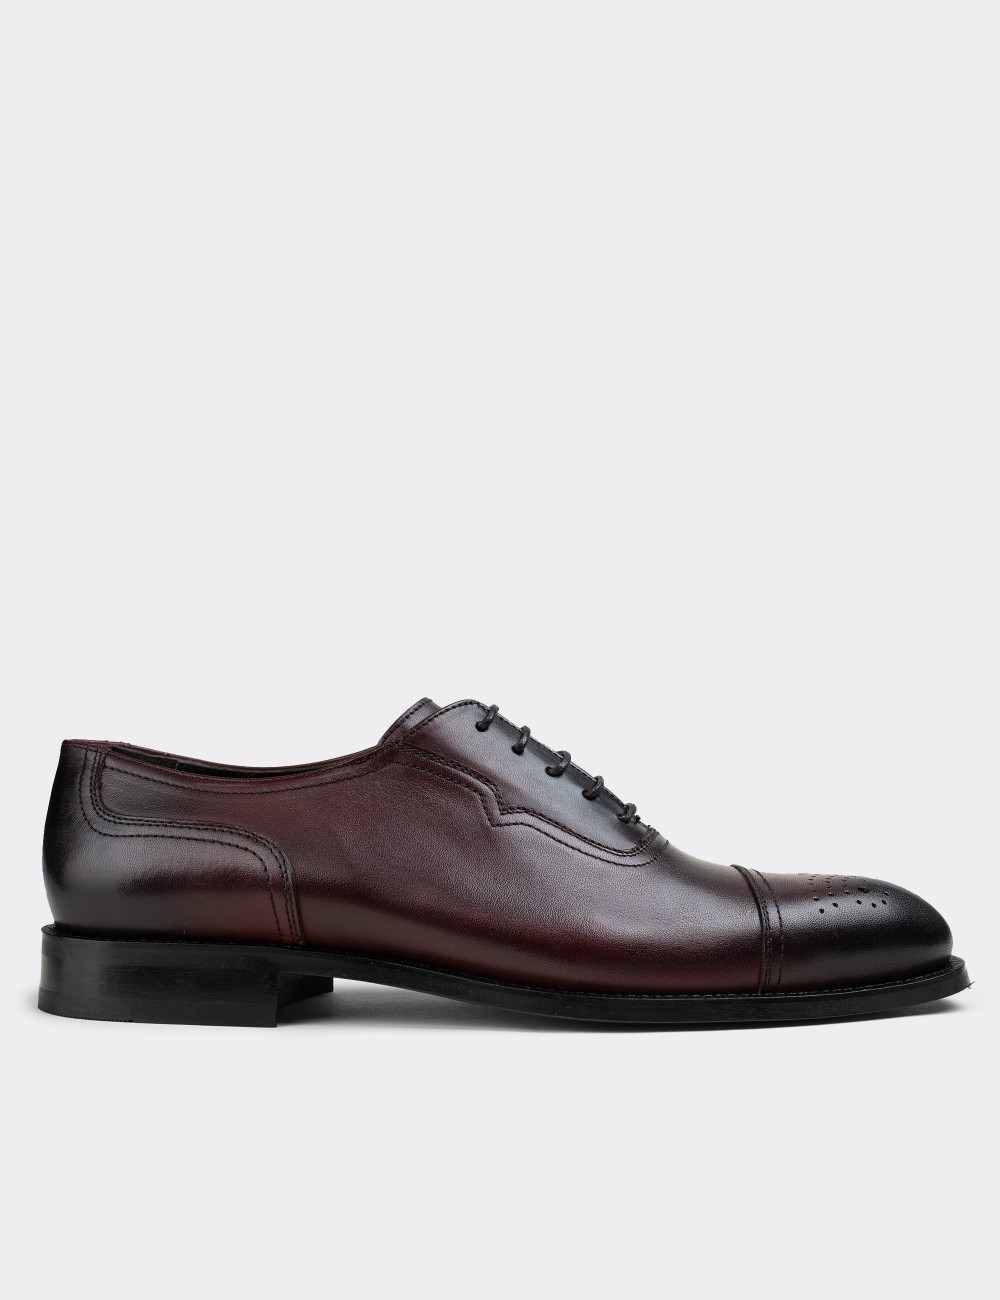 Burgundy  Leather Classic Shoes - 01687MBRDM01